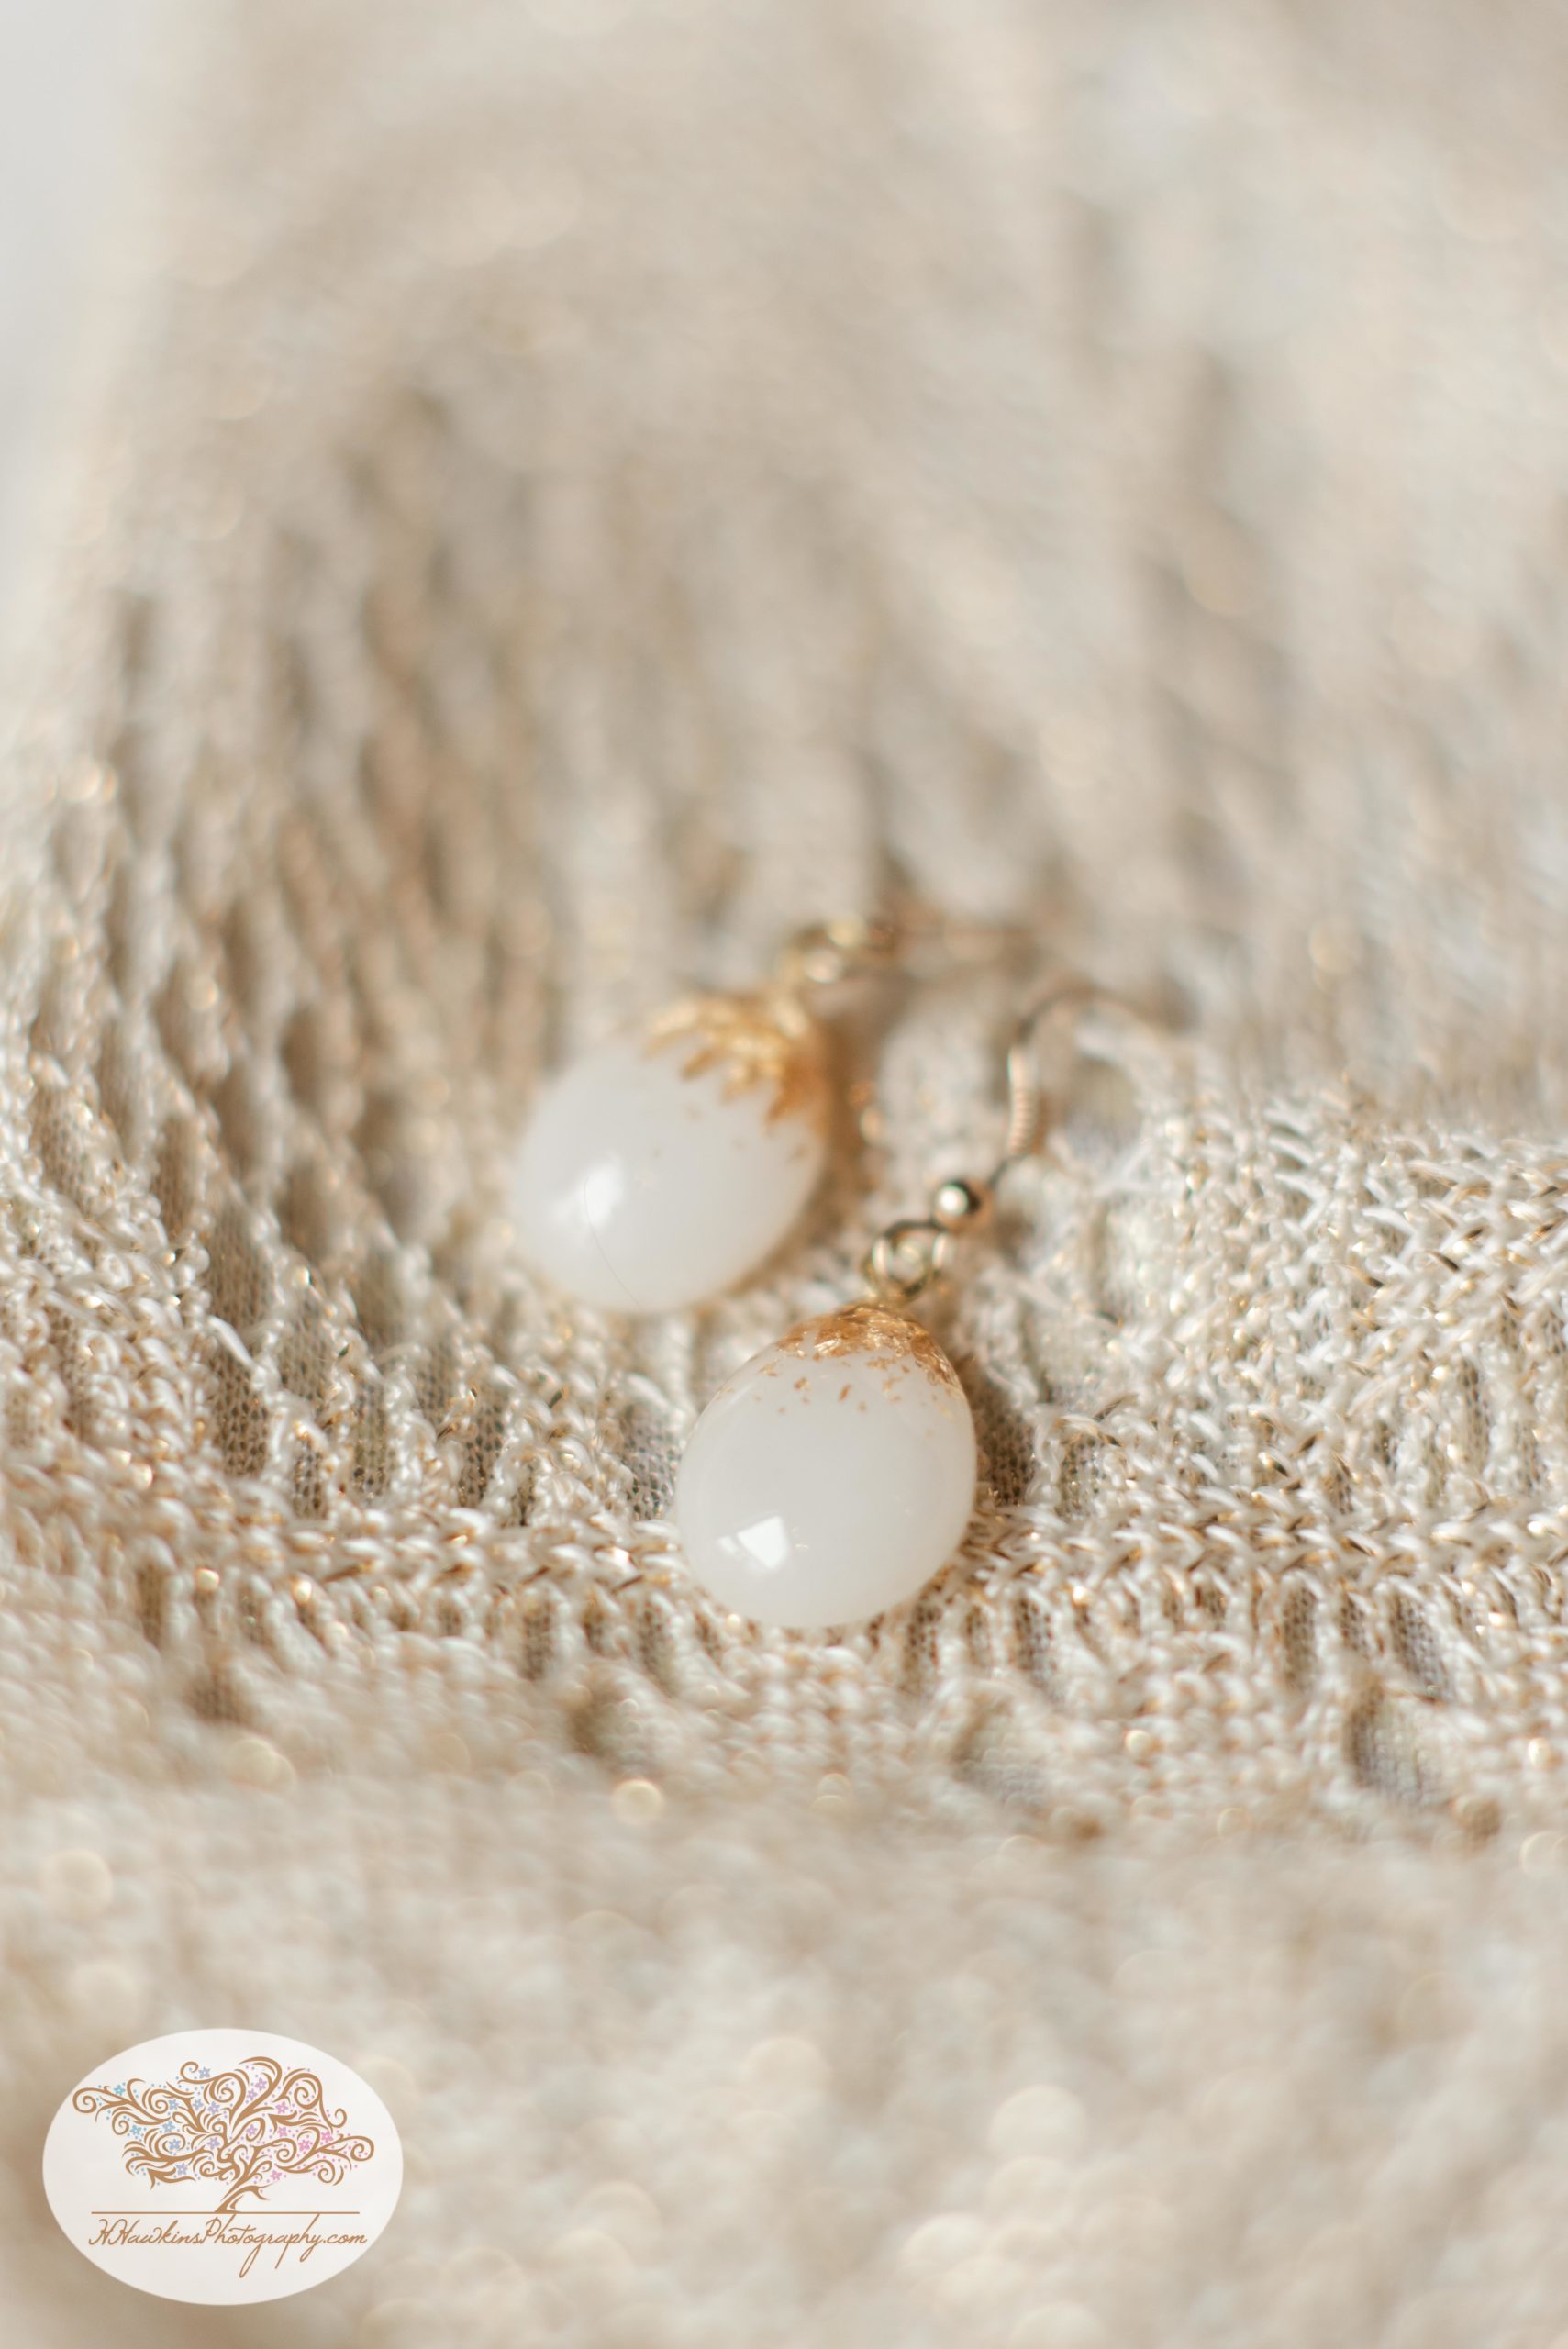 Brides earrings made out of breastmilk taken on purse